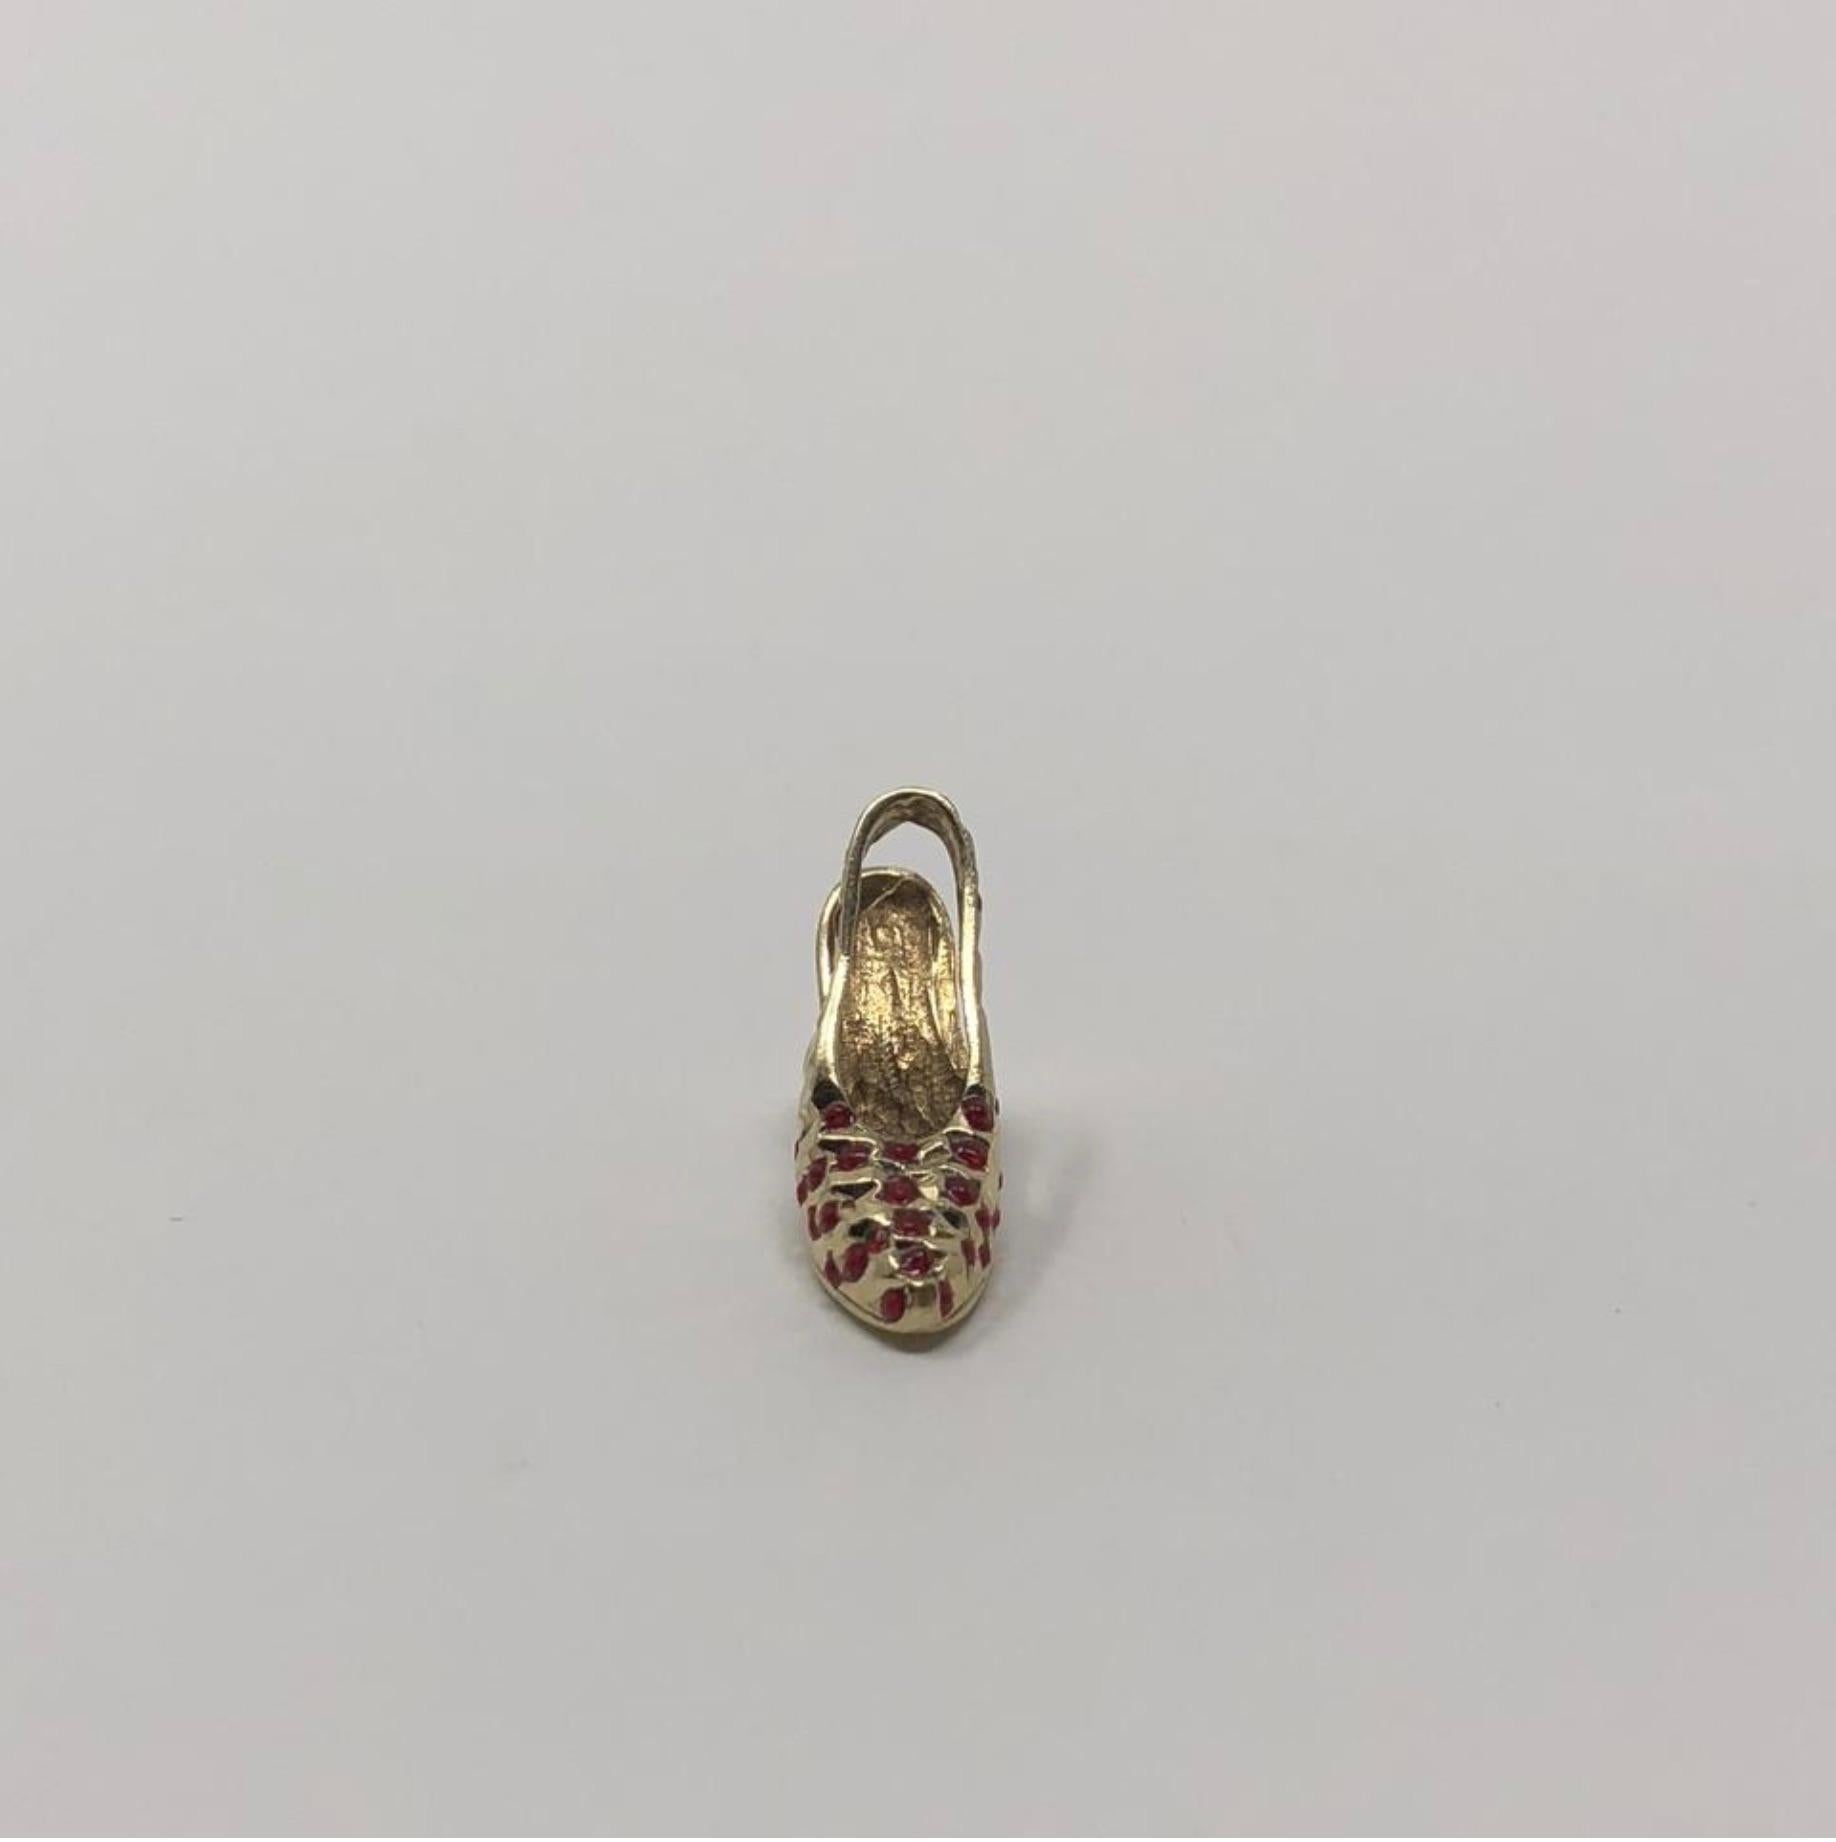 MODEL - Vintage 14k Gold Red Garnet High Heel Sling Back Pump Pendant Charm

CONDITION - Exceptional! No signs of wear.

SKU - 2362-FL

ORIGINAL RETAIL PRICE - 150 + tax

MATERIAL - 14k Gold

WEIGHT - 2.2 grams

DIMENSIONS - L.25 x H.75 x D.5

COMES